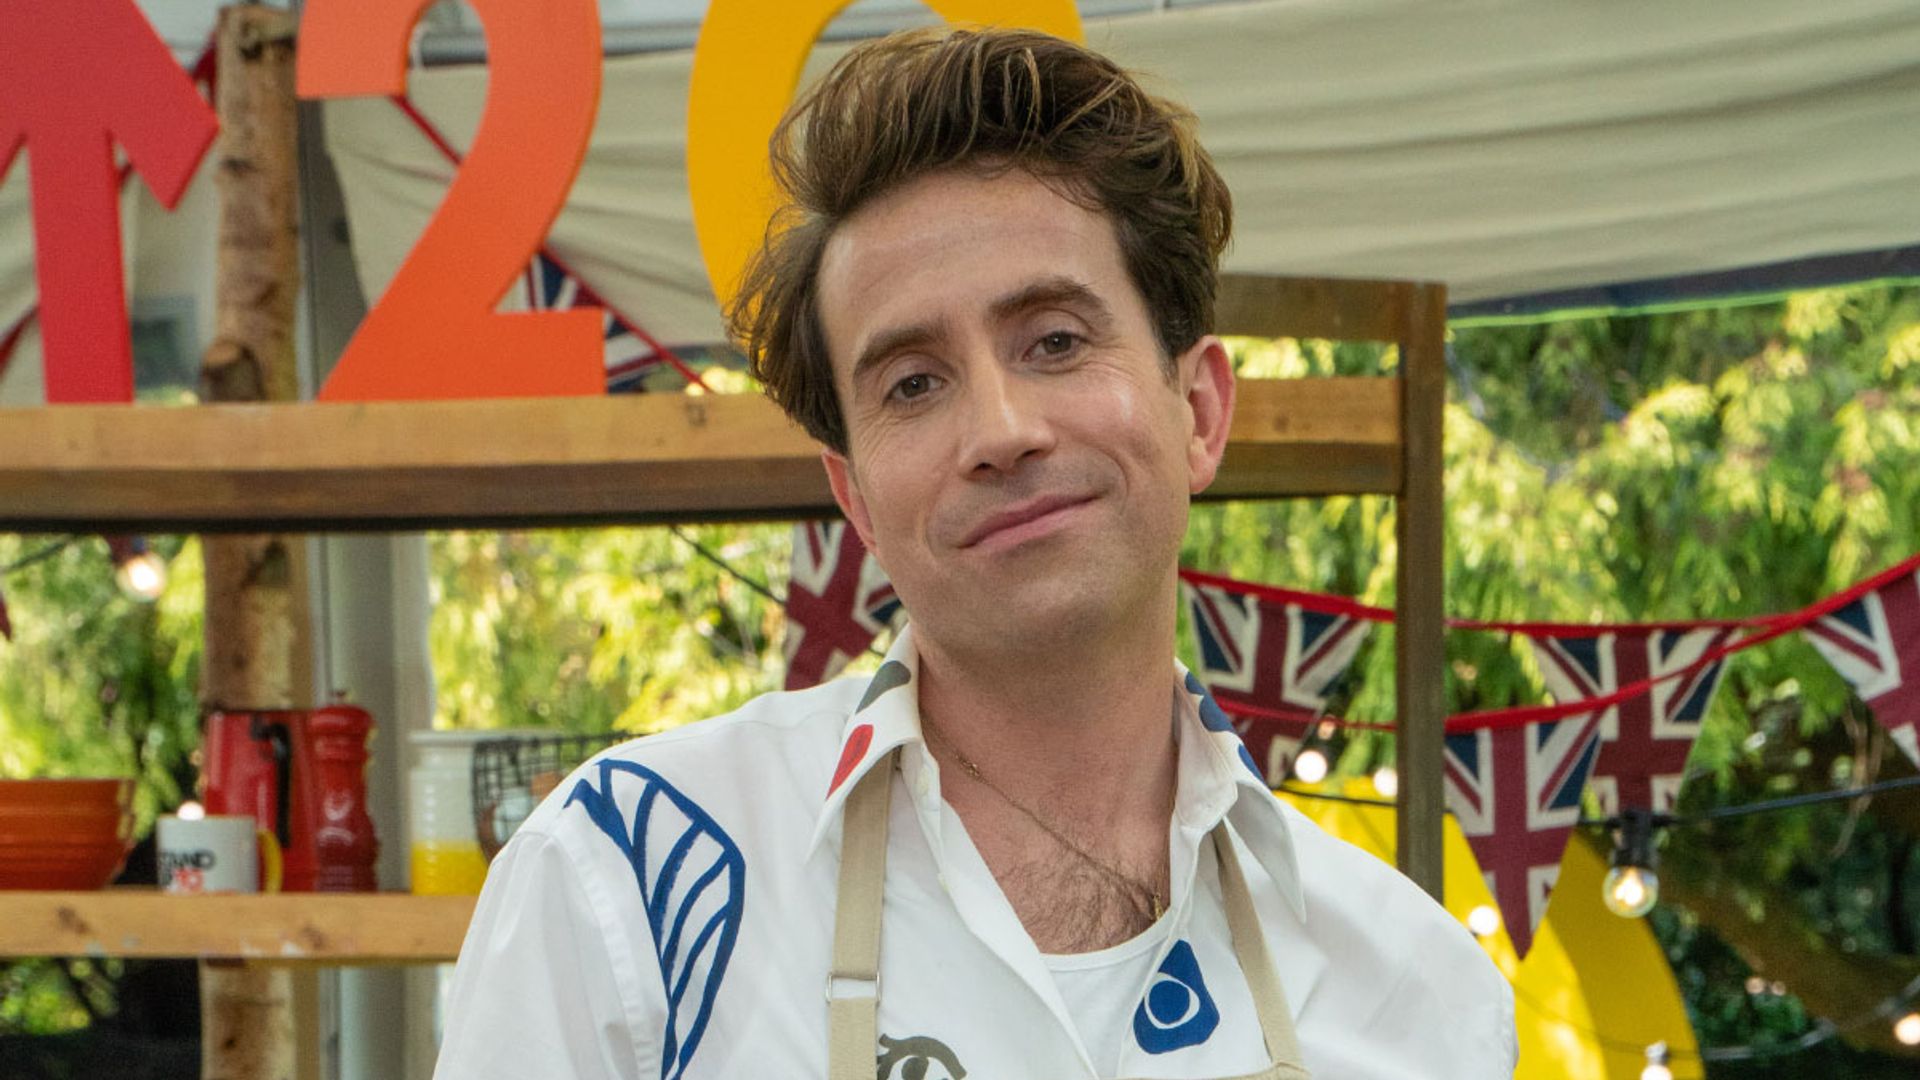 The Great Celebrity Bake Off: Who is Nick Grimshaw dating?